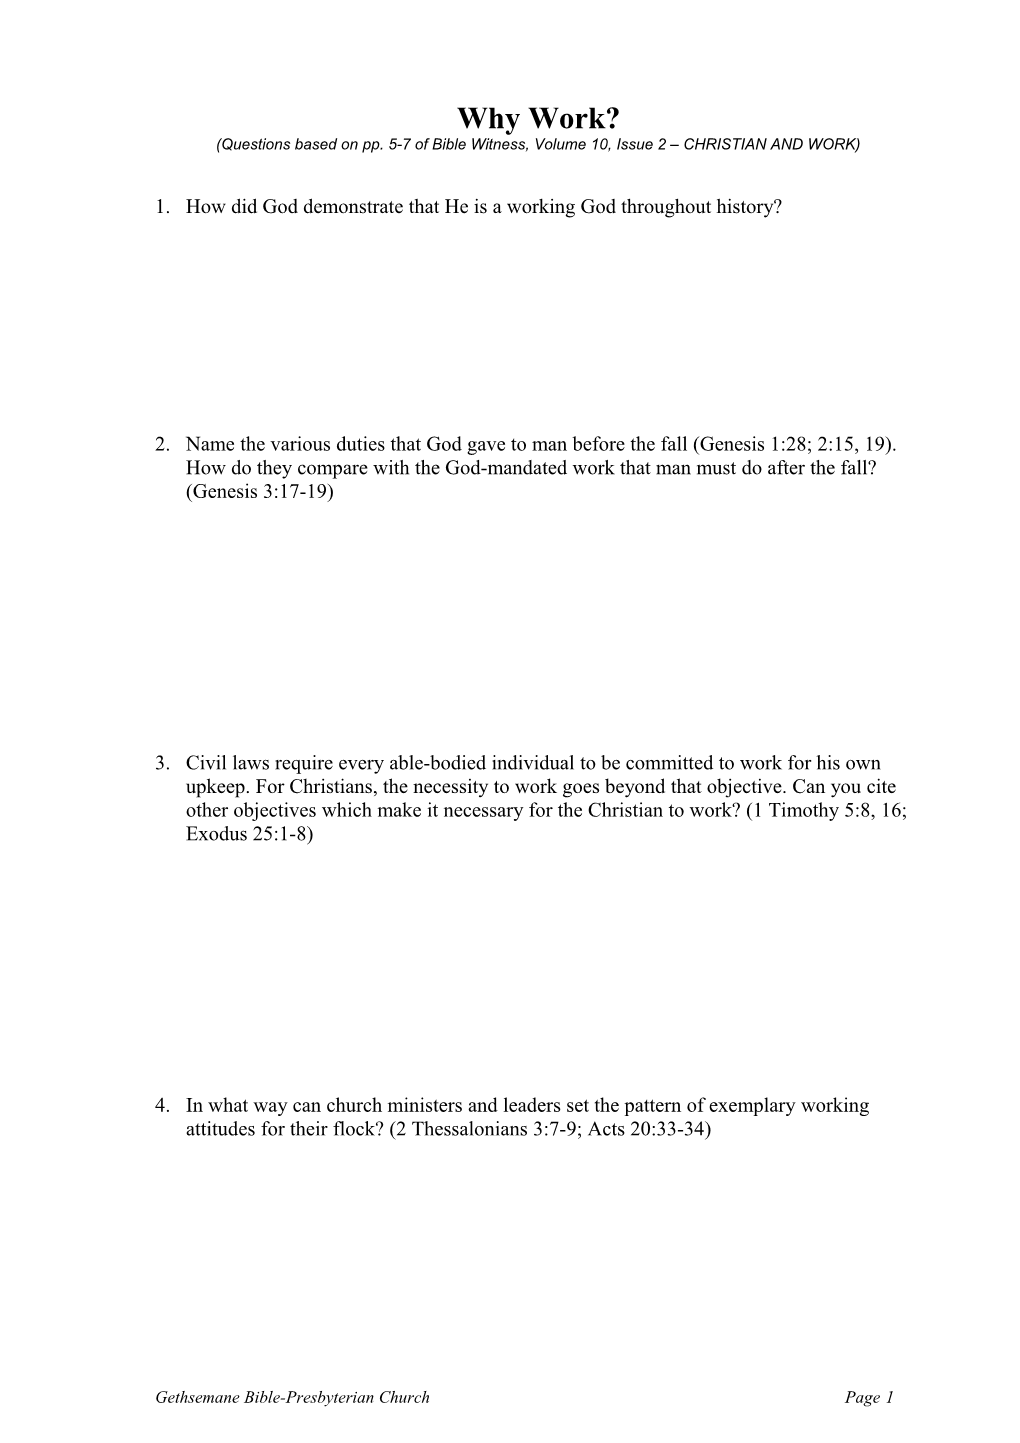 Questions Based on Pp. 5-7 of Bible Witness, Volume 10, Issue 2 CHRISTIAN and WORK